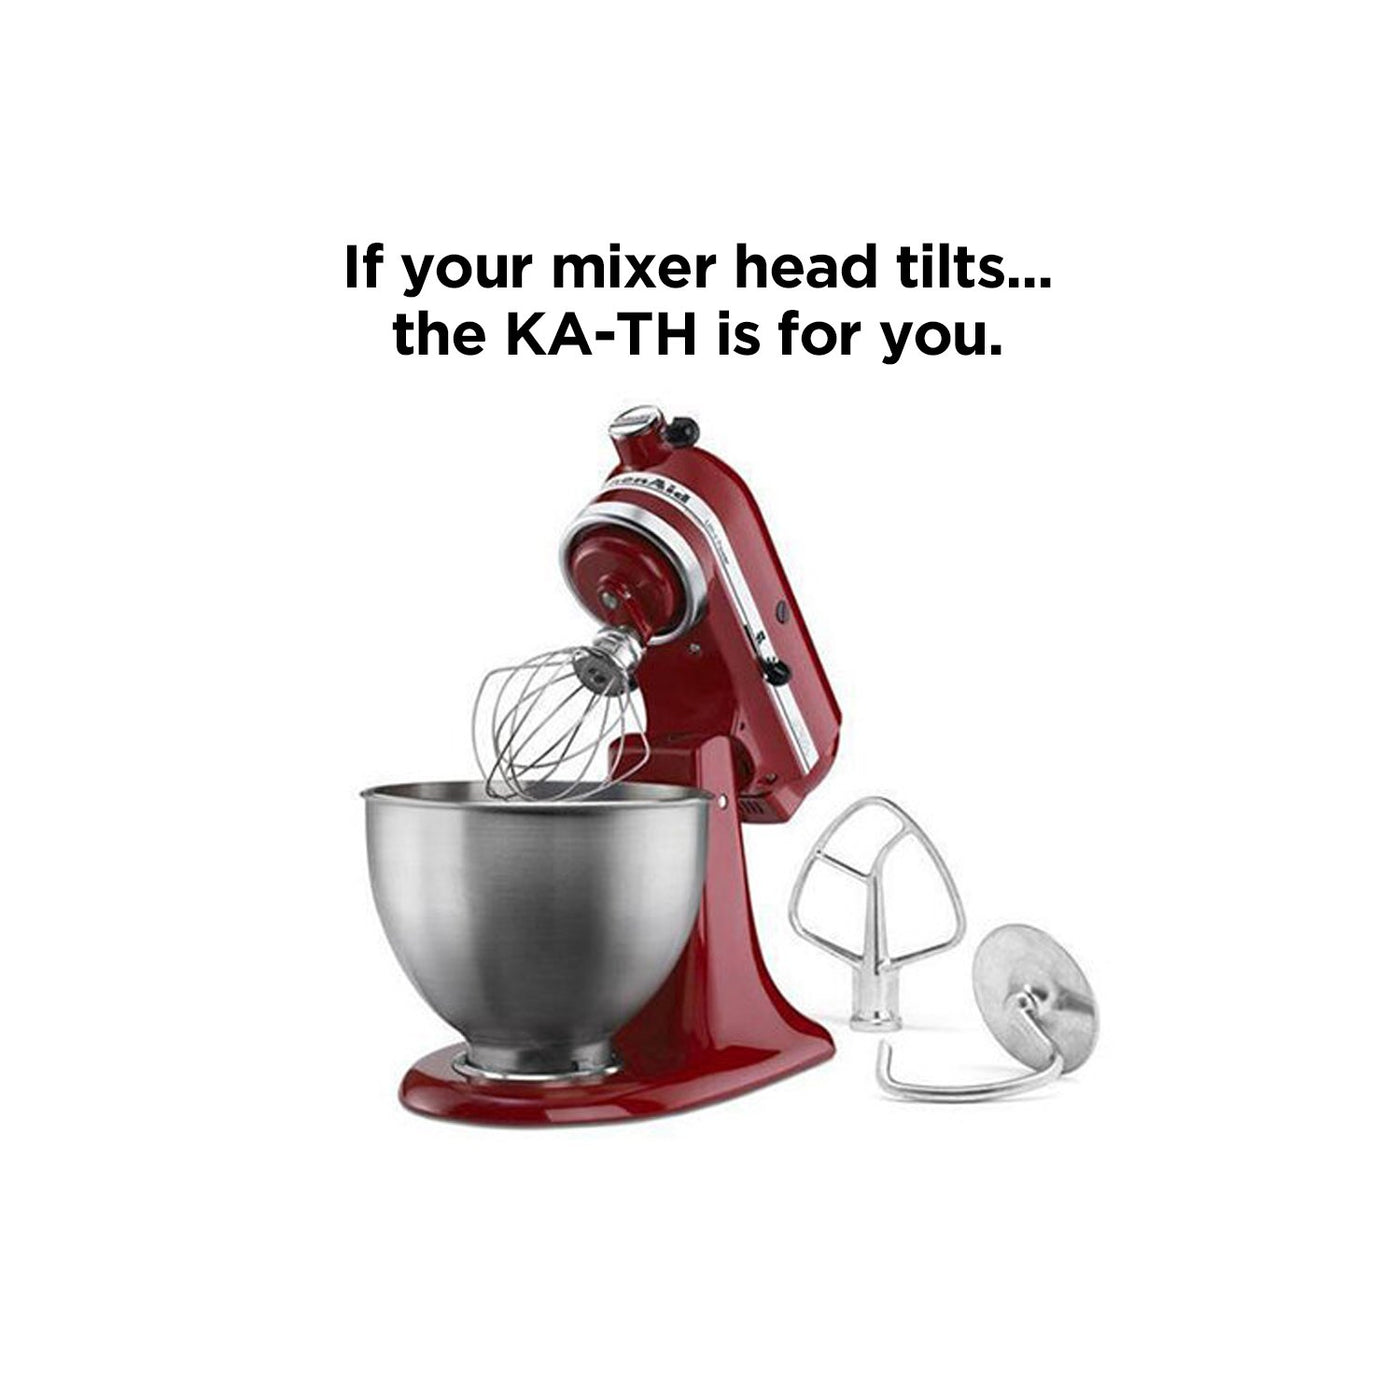  New Metro KA-5LR Original Beater Blade Works w/ Most KitchenAid  5 Qt Bowl-Lift Stand Mixers, Red: Electric Mixer Replacement Parts: Home &  Kitchen